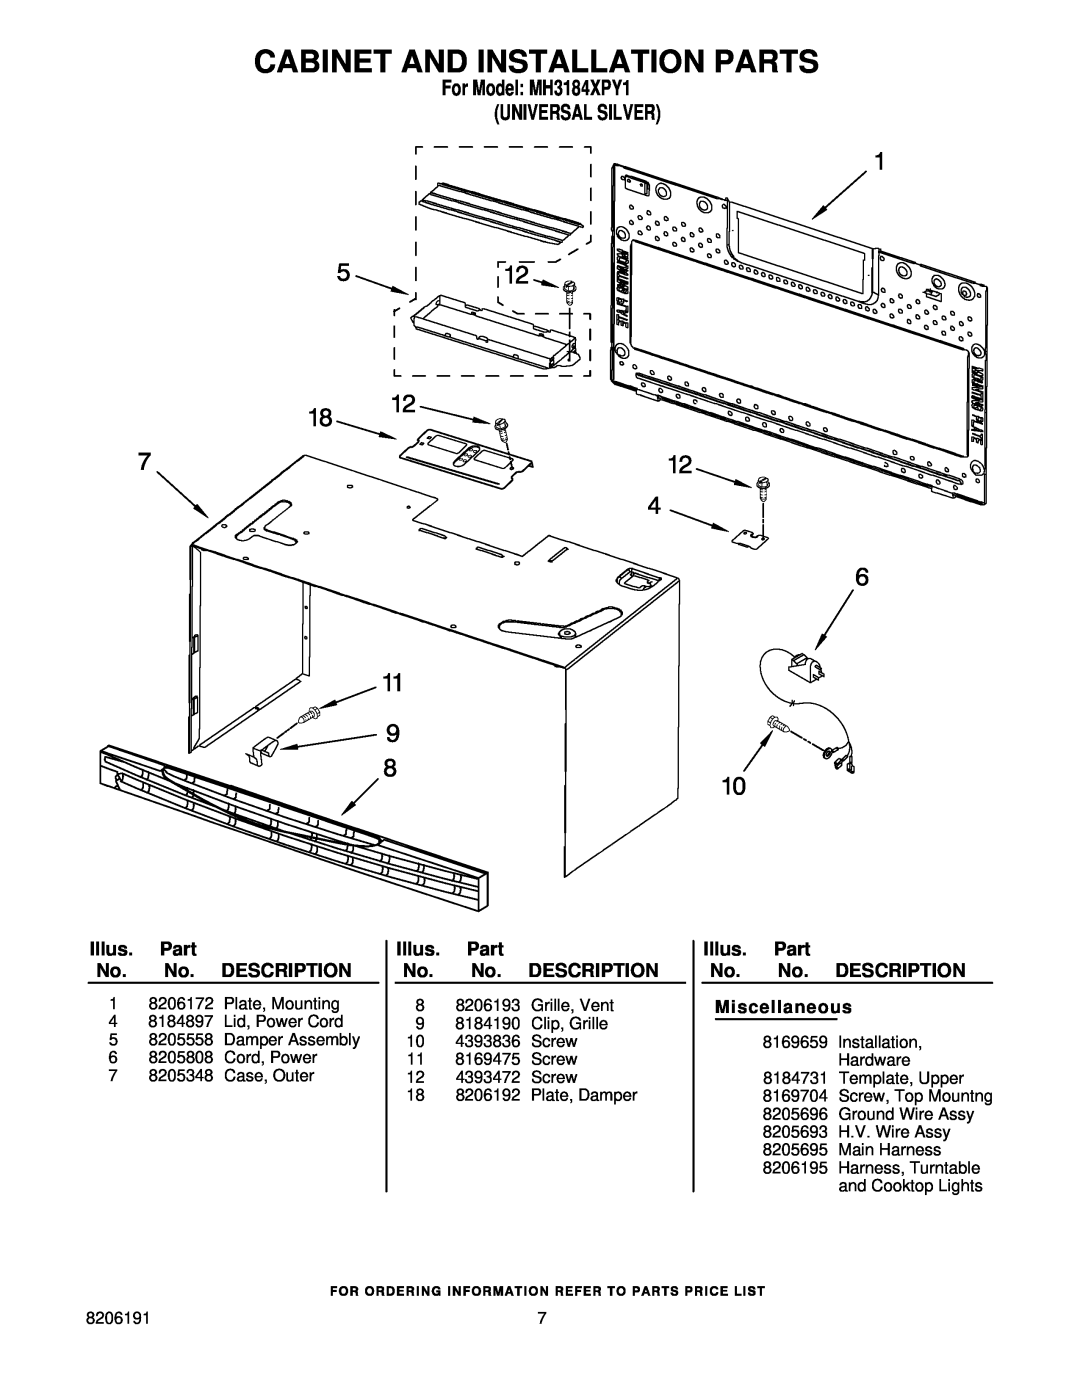 Whirlpool MH3184XPY1 manual Cabinet And Installation Parts, Illus. Part No. No. DESCRIPTION Miscellaneous 